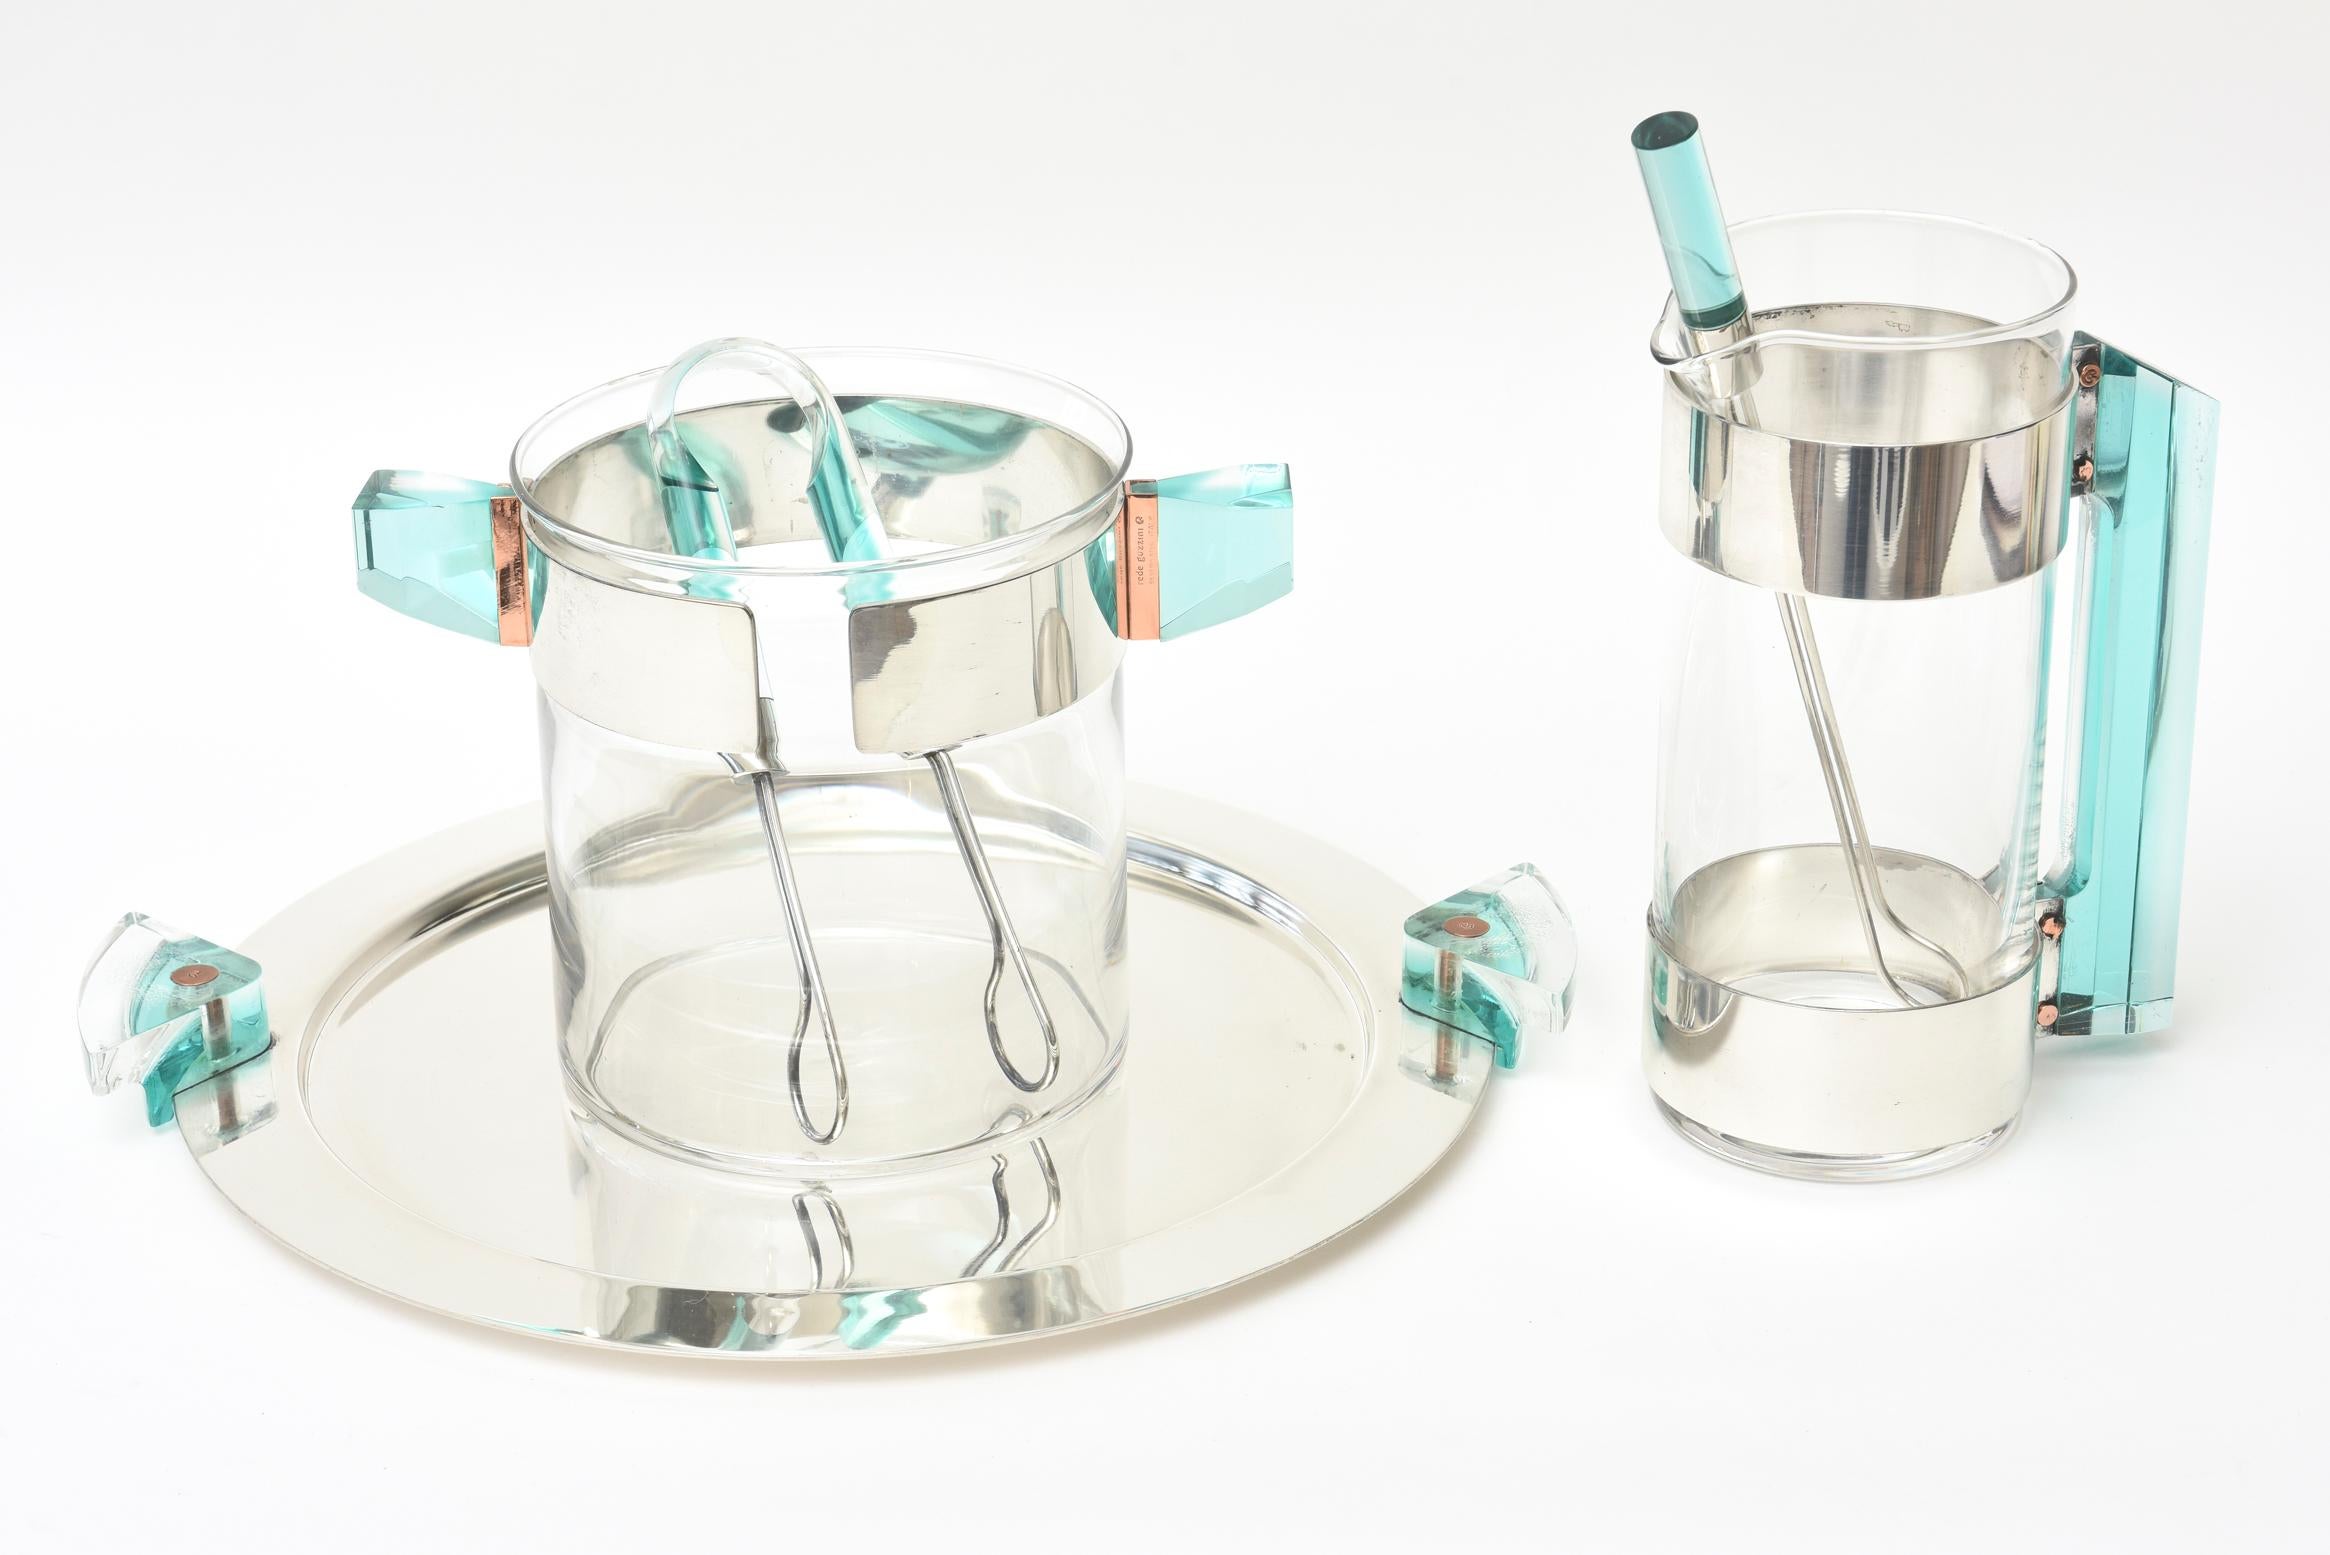 These amazing luscious set of hallmarked Italian Rede Guzzini barware set is comprised of a round silver plate tray with Lucite handles with copper accents, an ice bucket, a martini shaker, ice thongs and the stirrer for the martini shaker. There